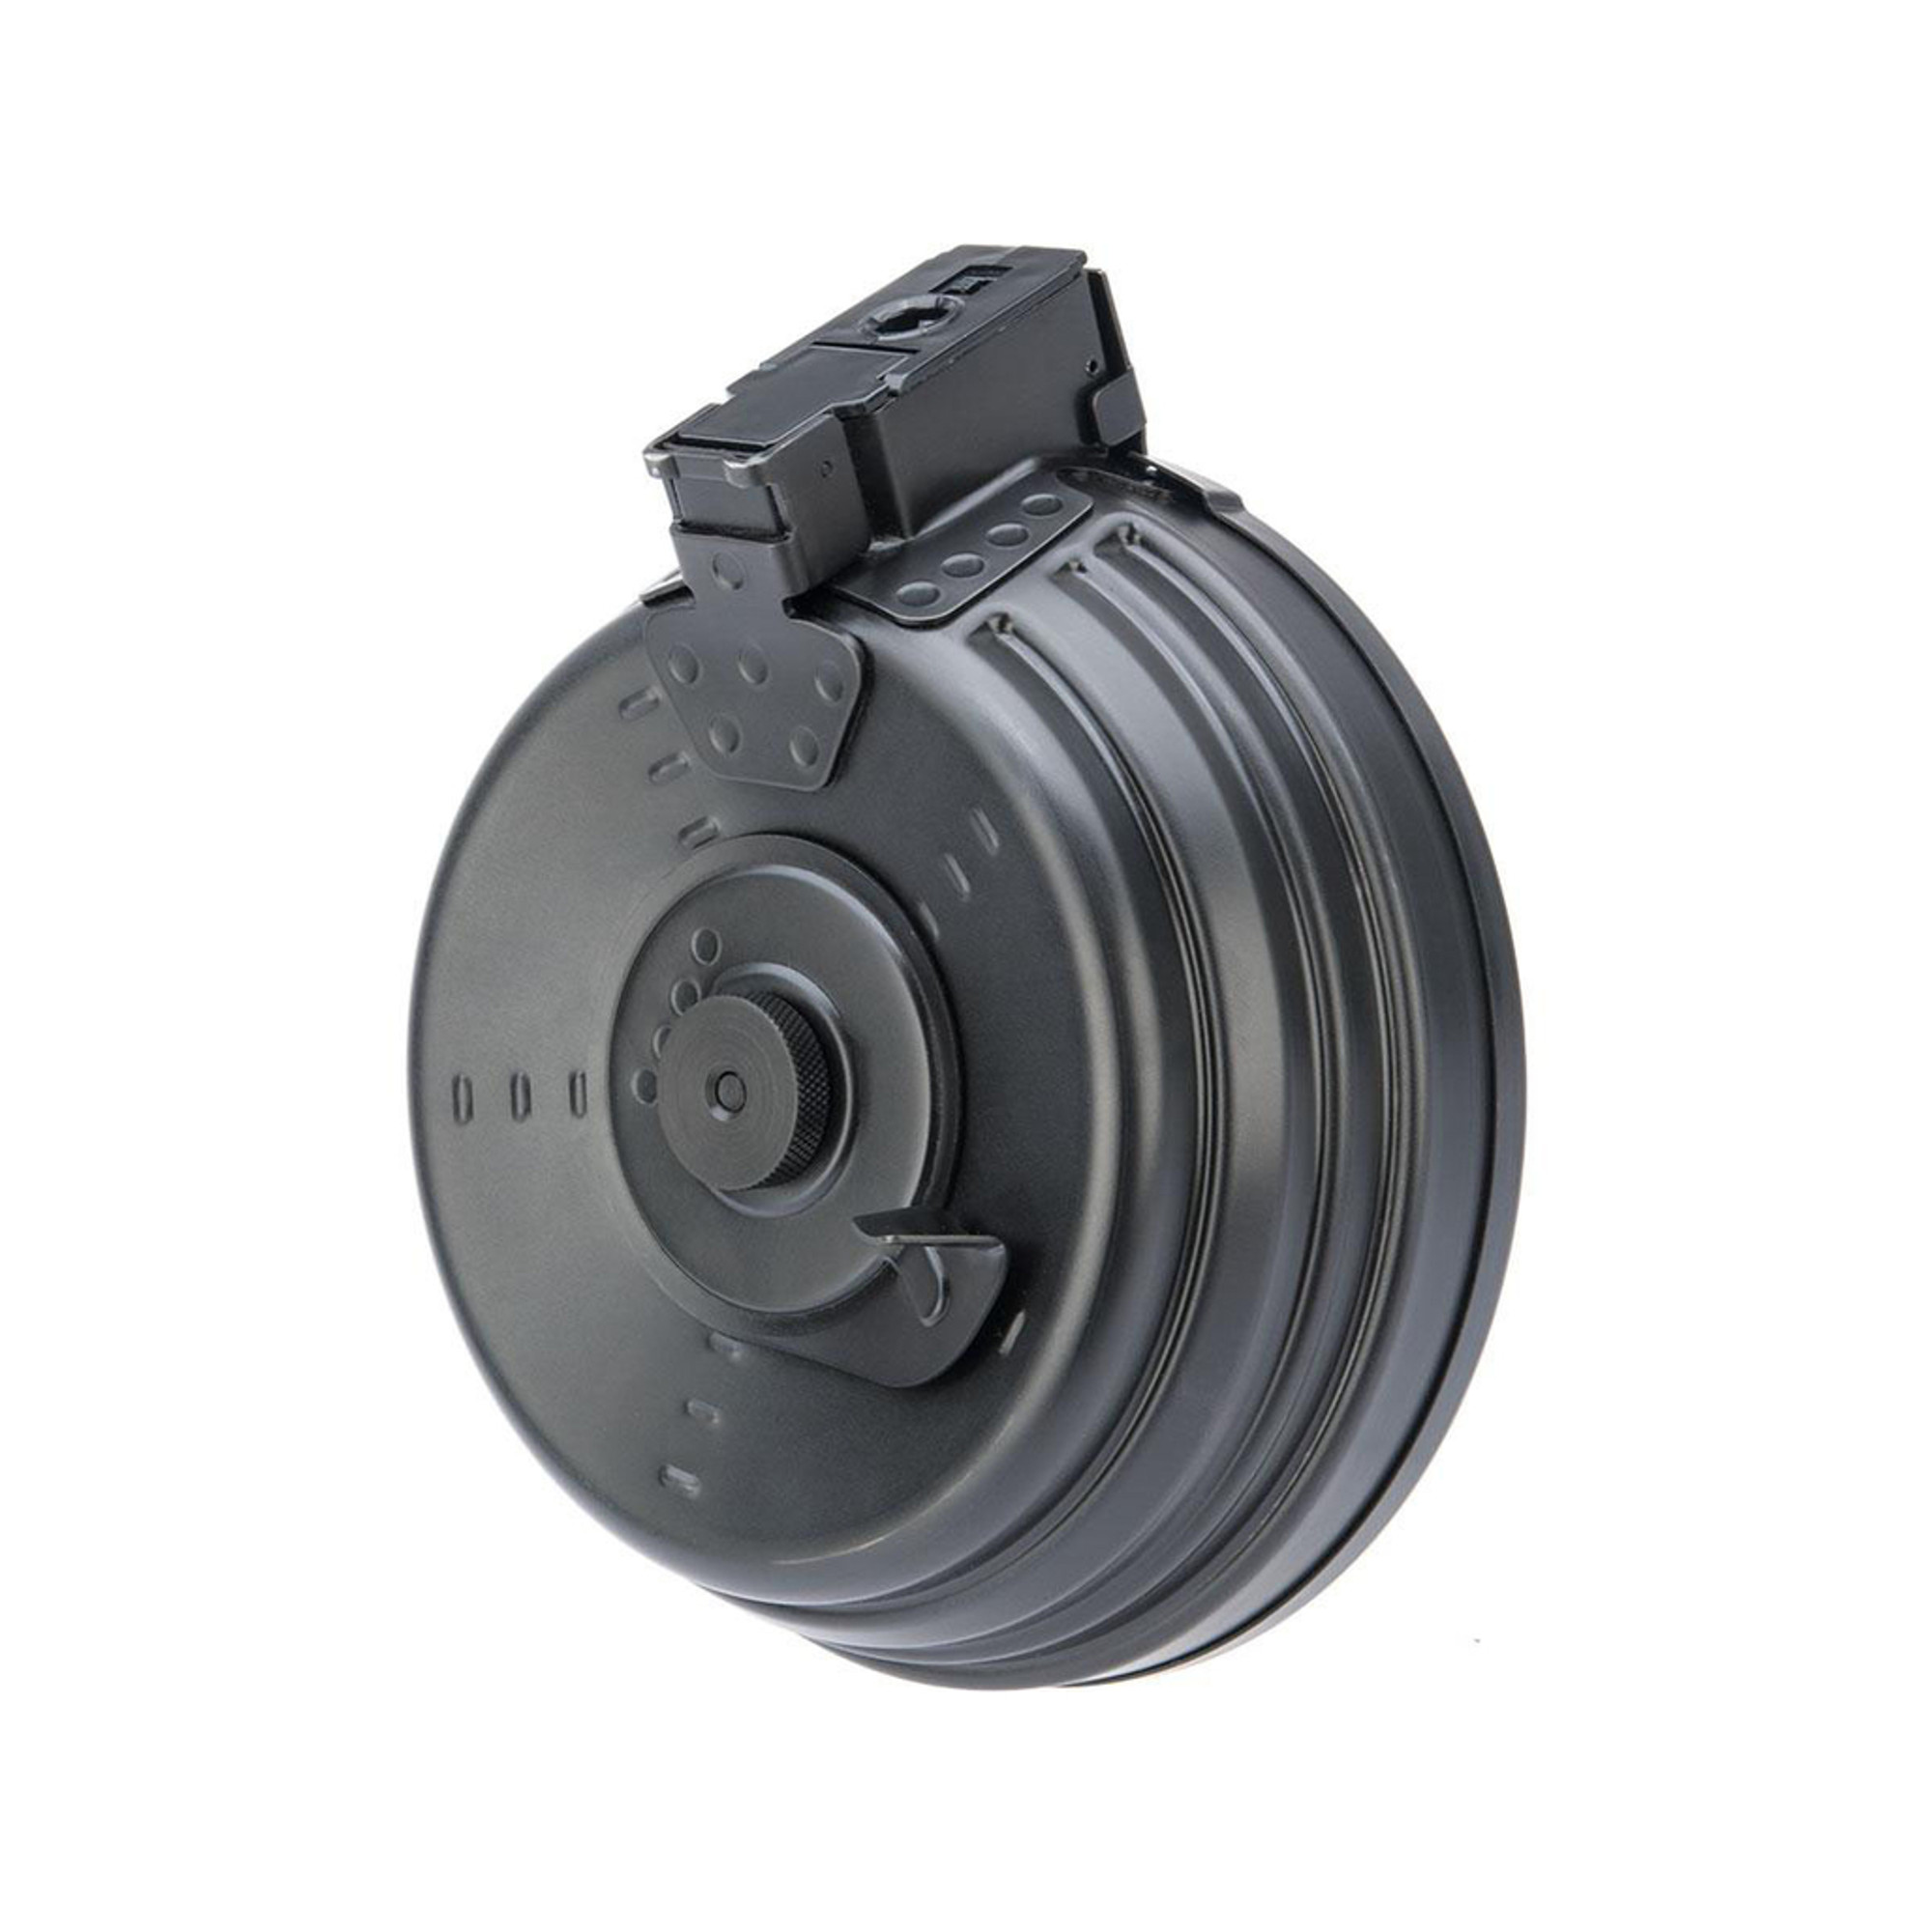 LCT 2000rd Electric Winding Drum Magazine for AK Series Airsoft AEG